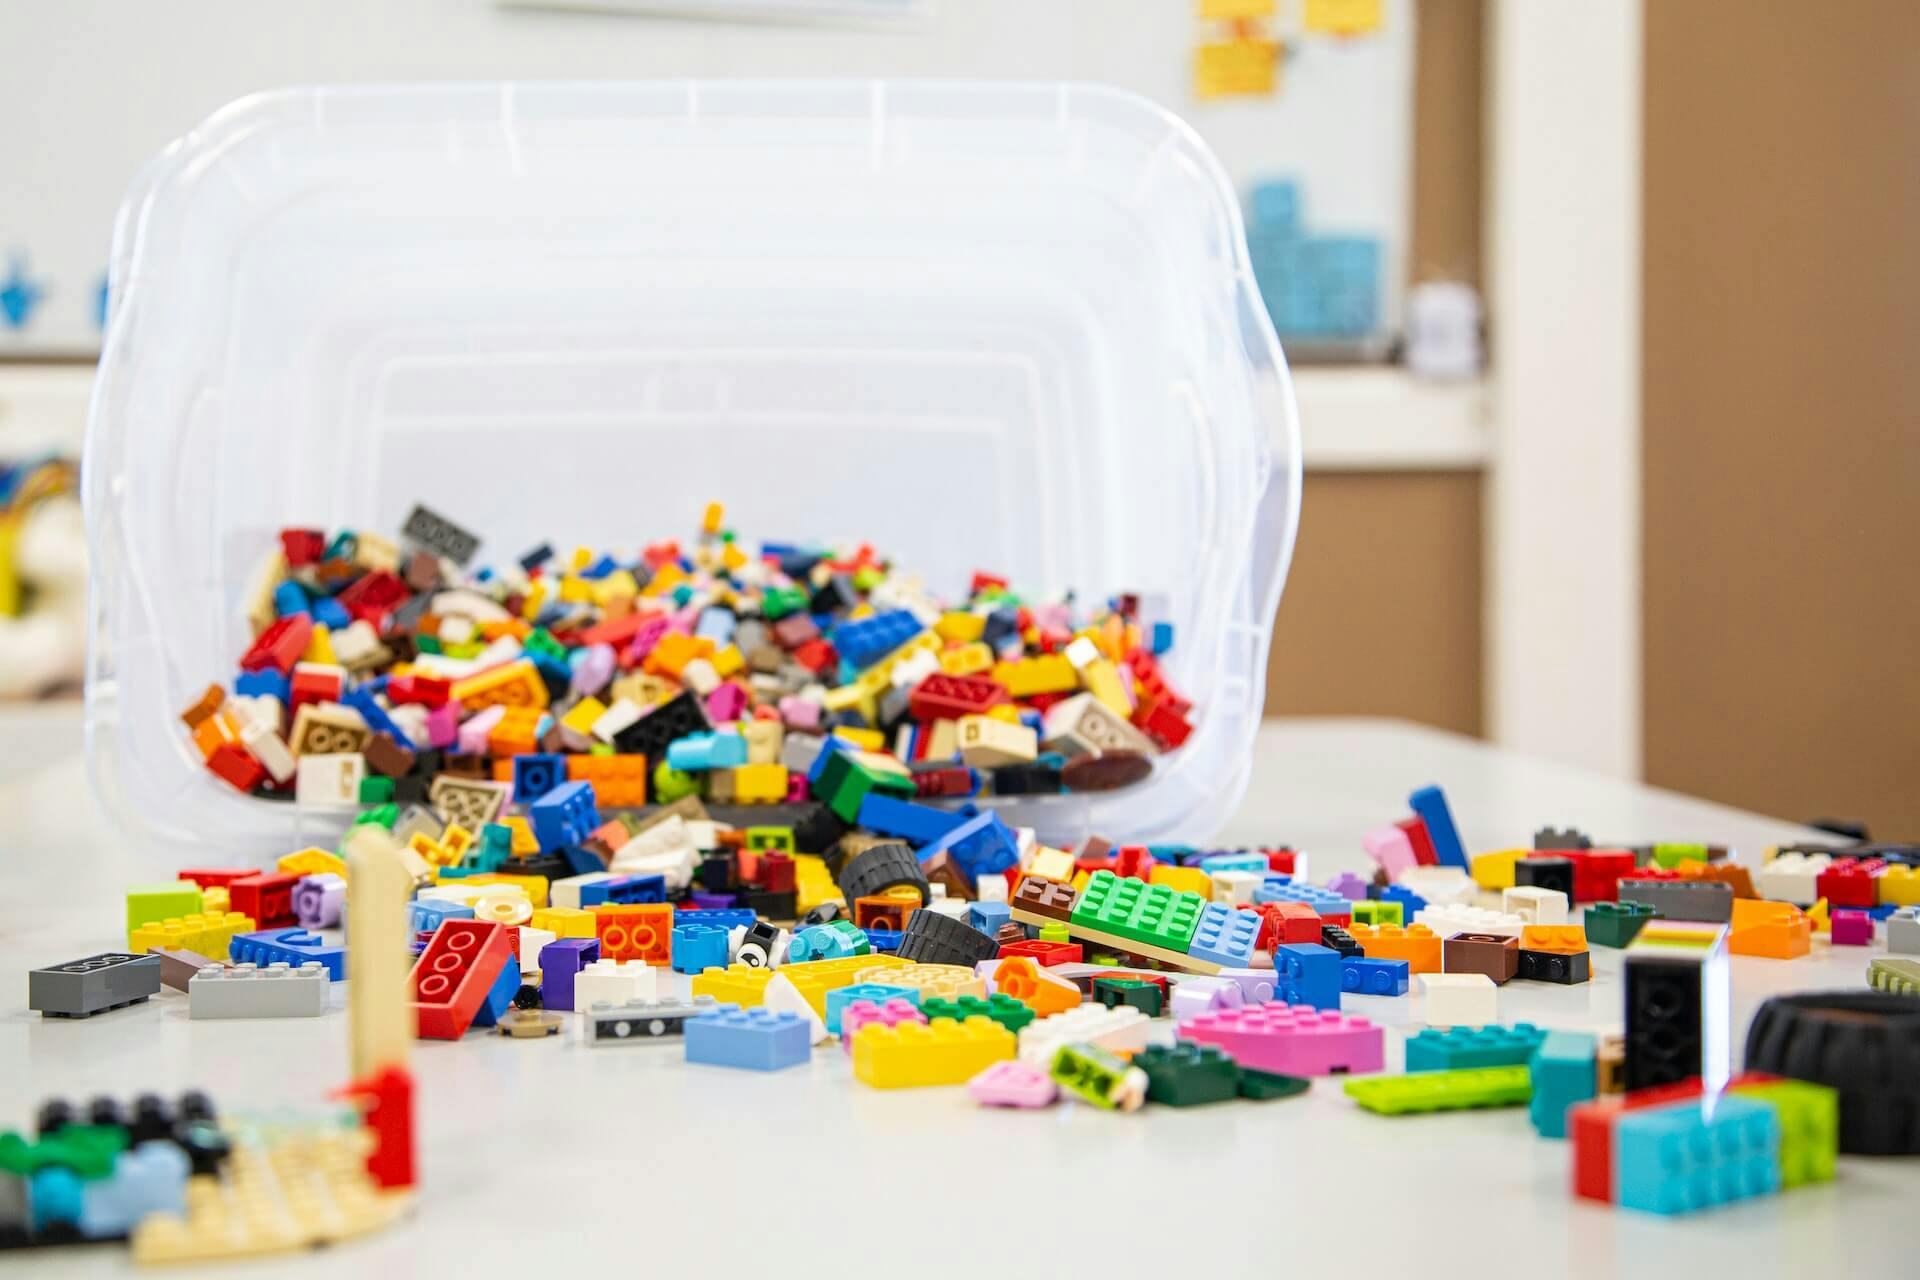 Building post-COVID offices with LEGO